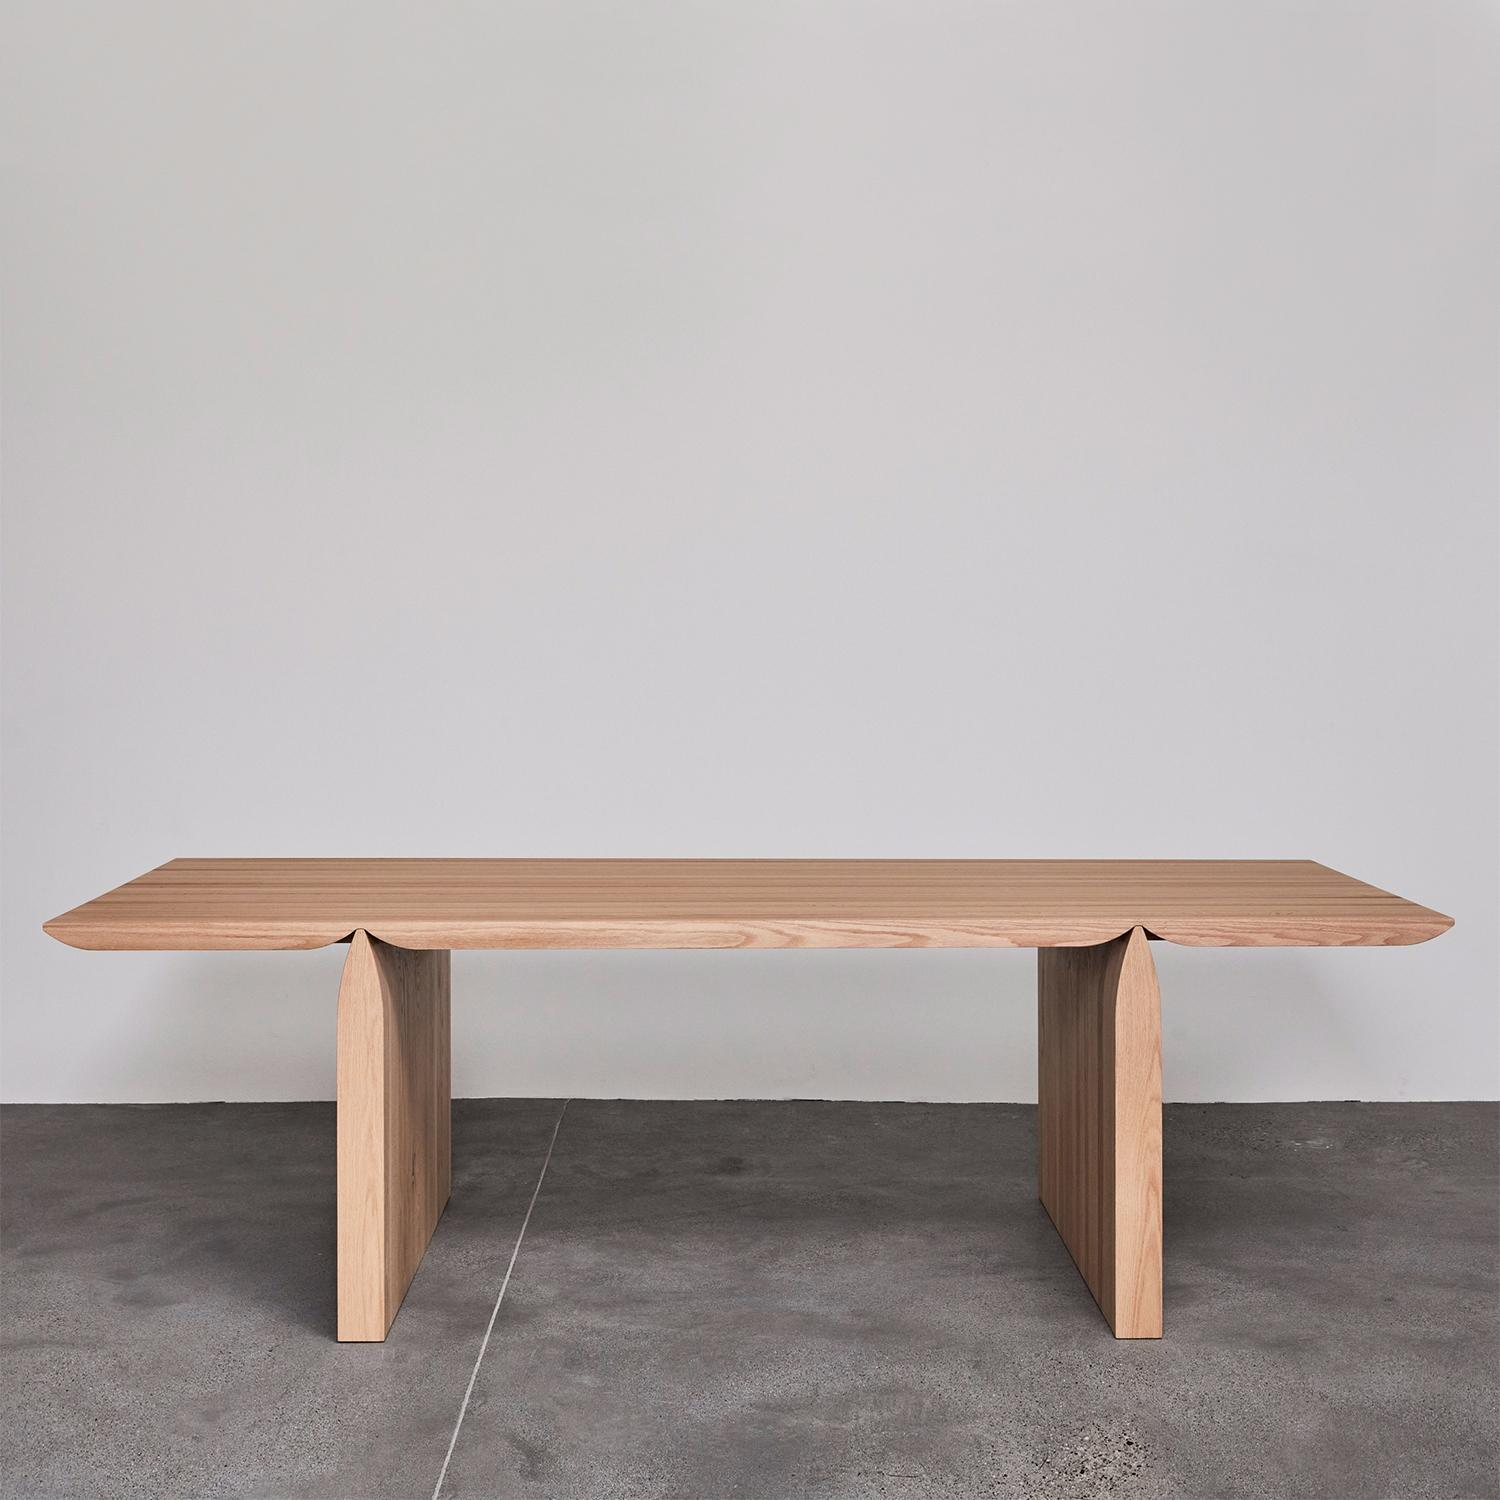 Dining Table Enclave Oak with all structure in 
solid oak, with glued lists top with 2 staight edges.
Available on request in:
L200xD100xH75cm, price: 10900,00€
L220xD100xH75cm, price: 11500,00€
L240xD100xH75cm, price: